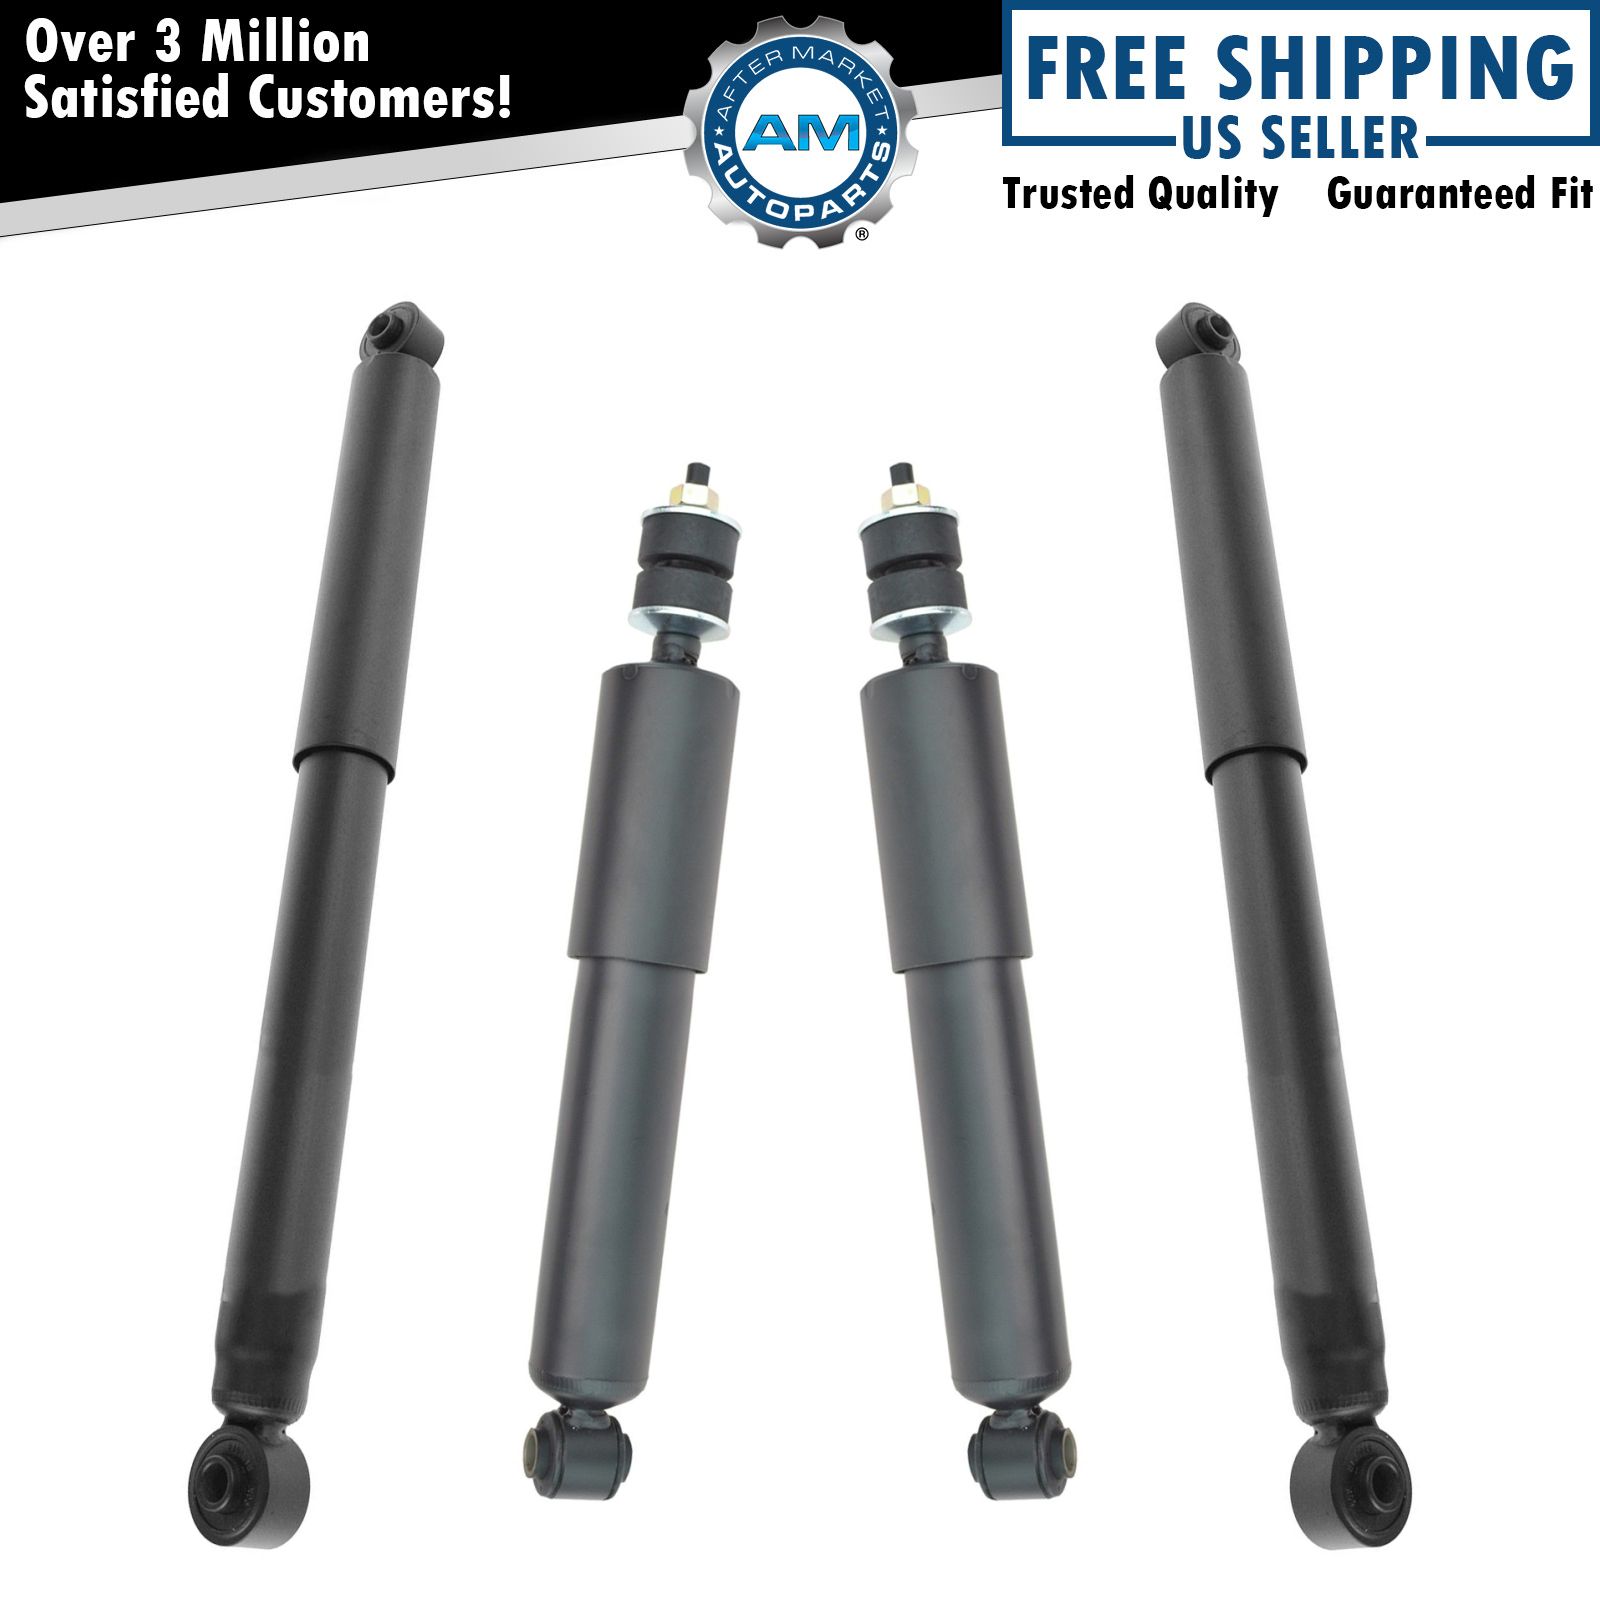 Shock Absorbers Front & Rear Kit Set of 4 for Dodge Ram 1500 2500 3500 2WD